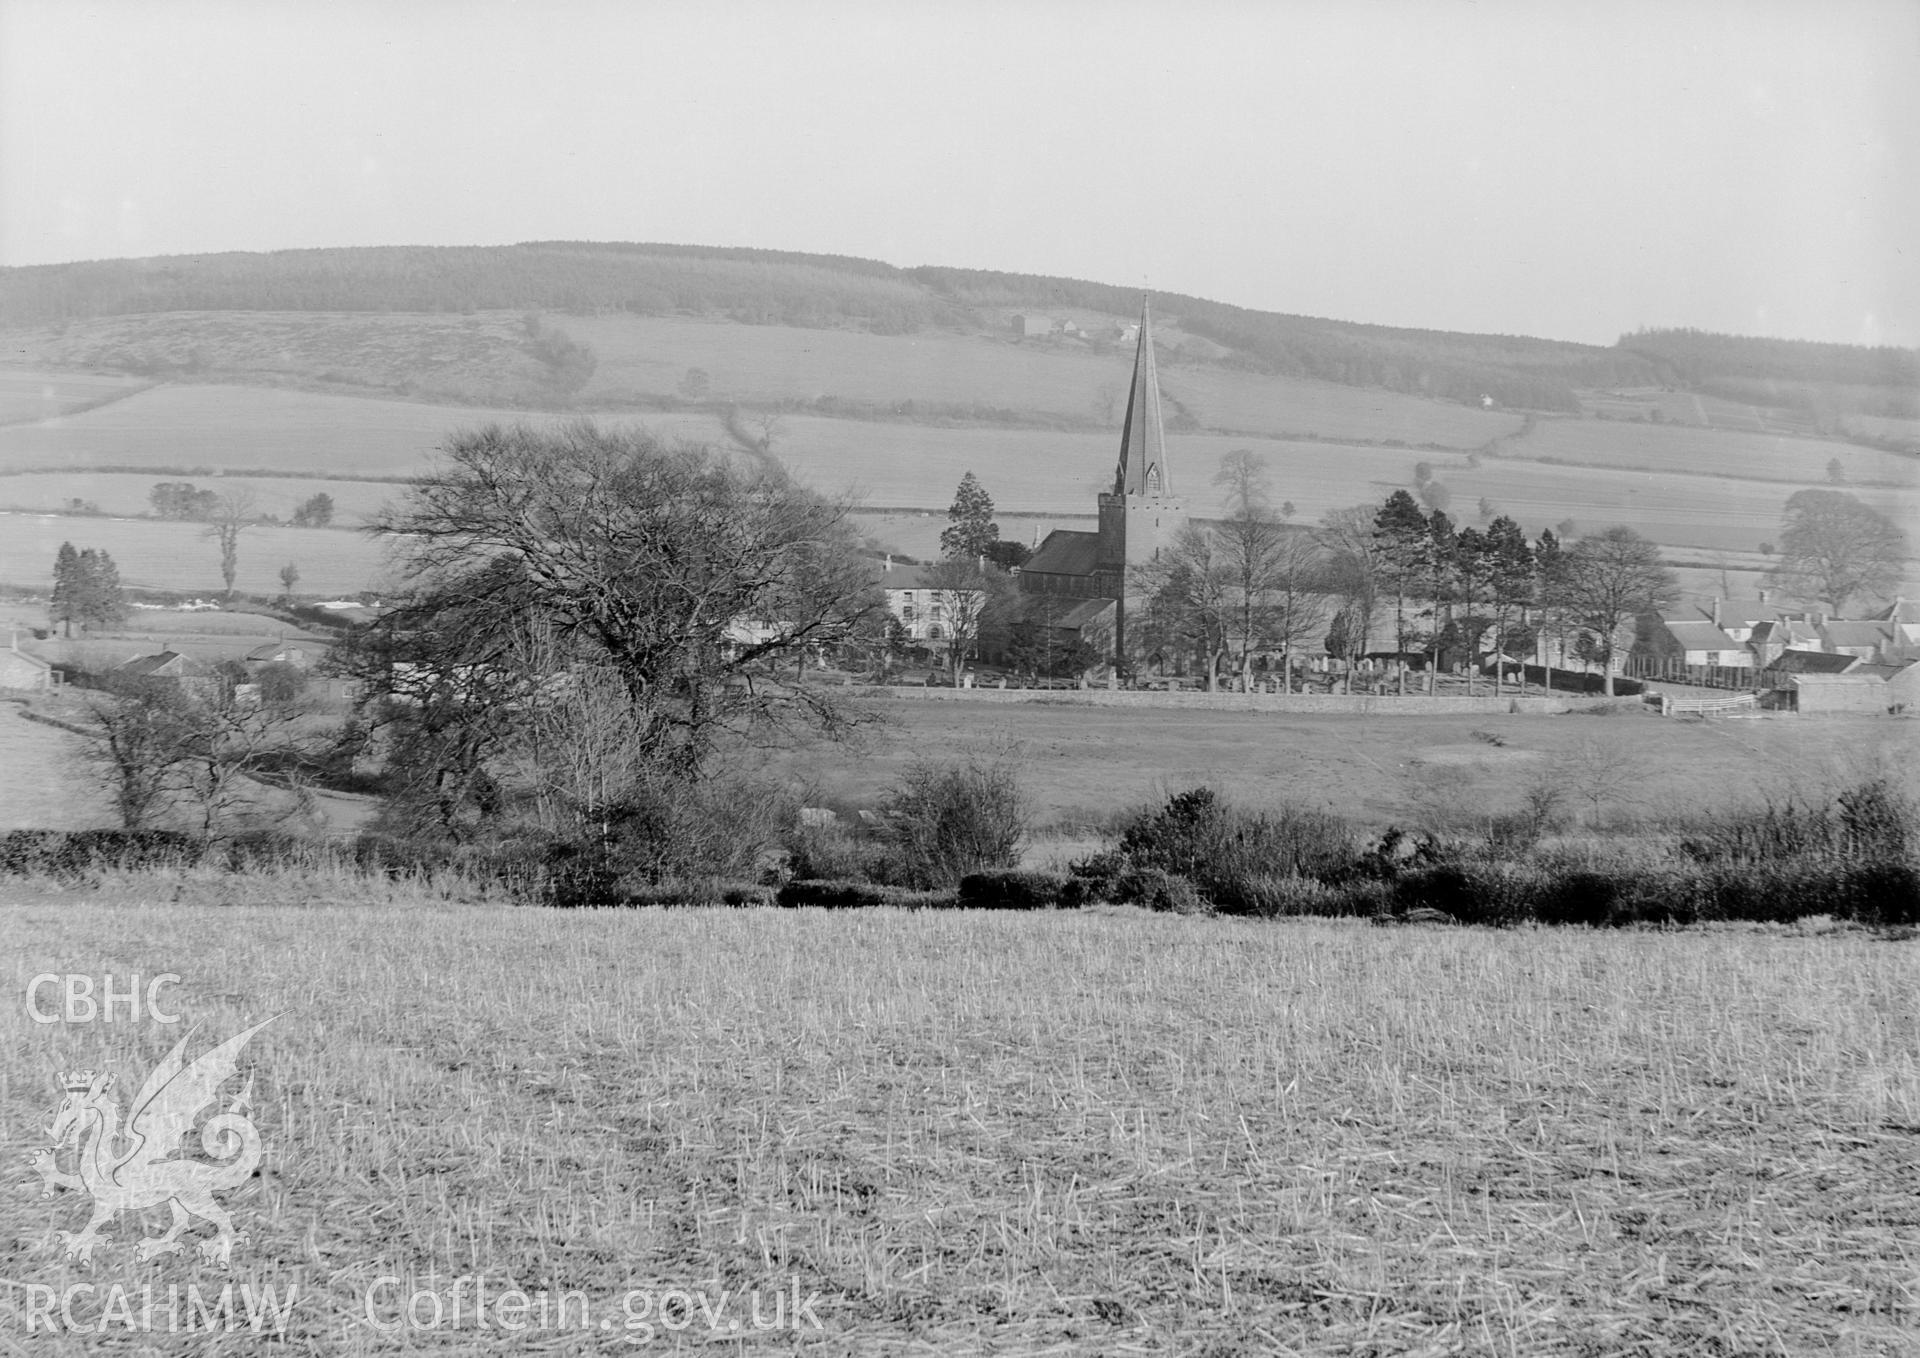 Landscape view of Trellech from the northwest.